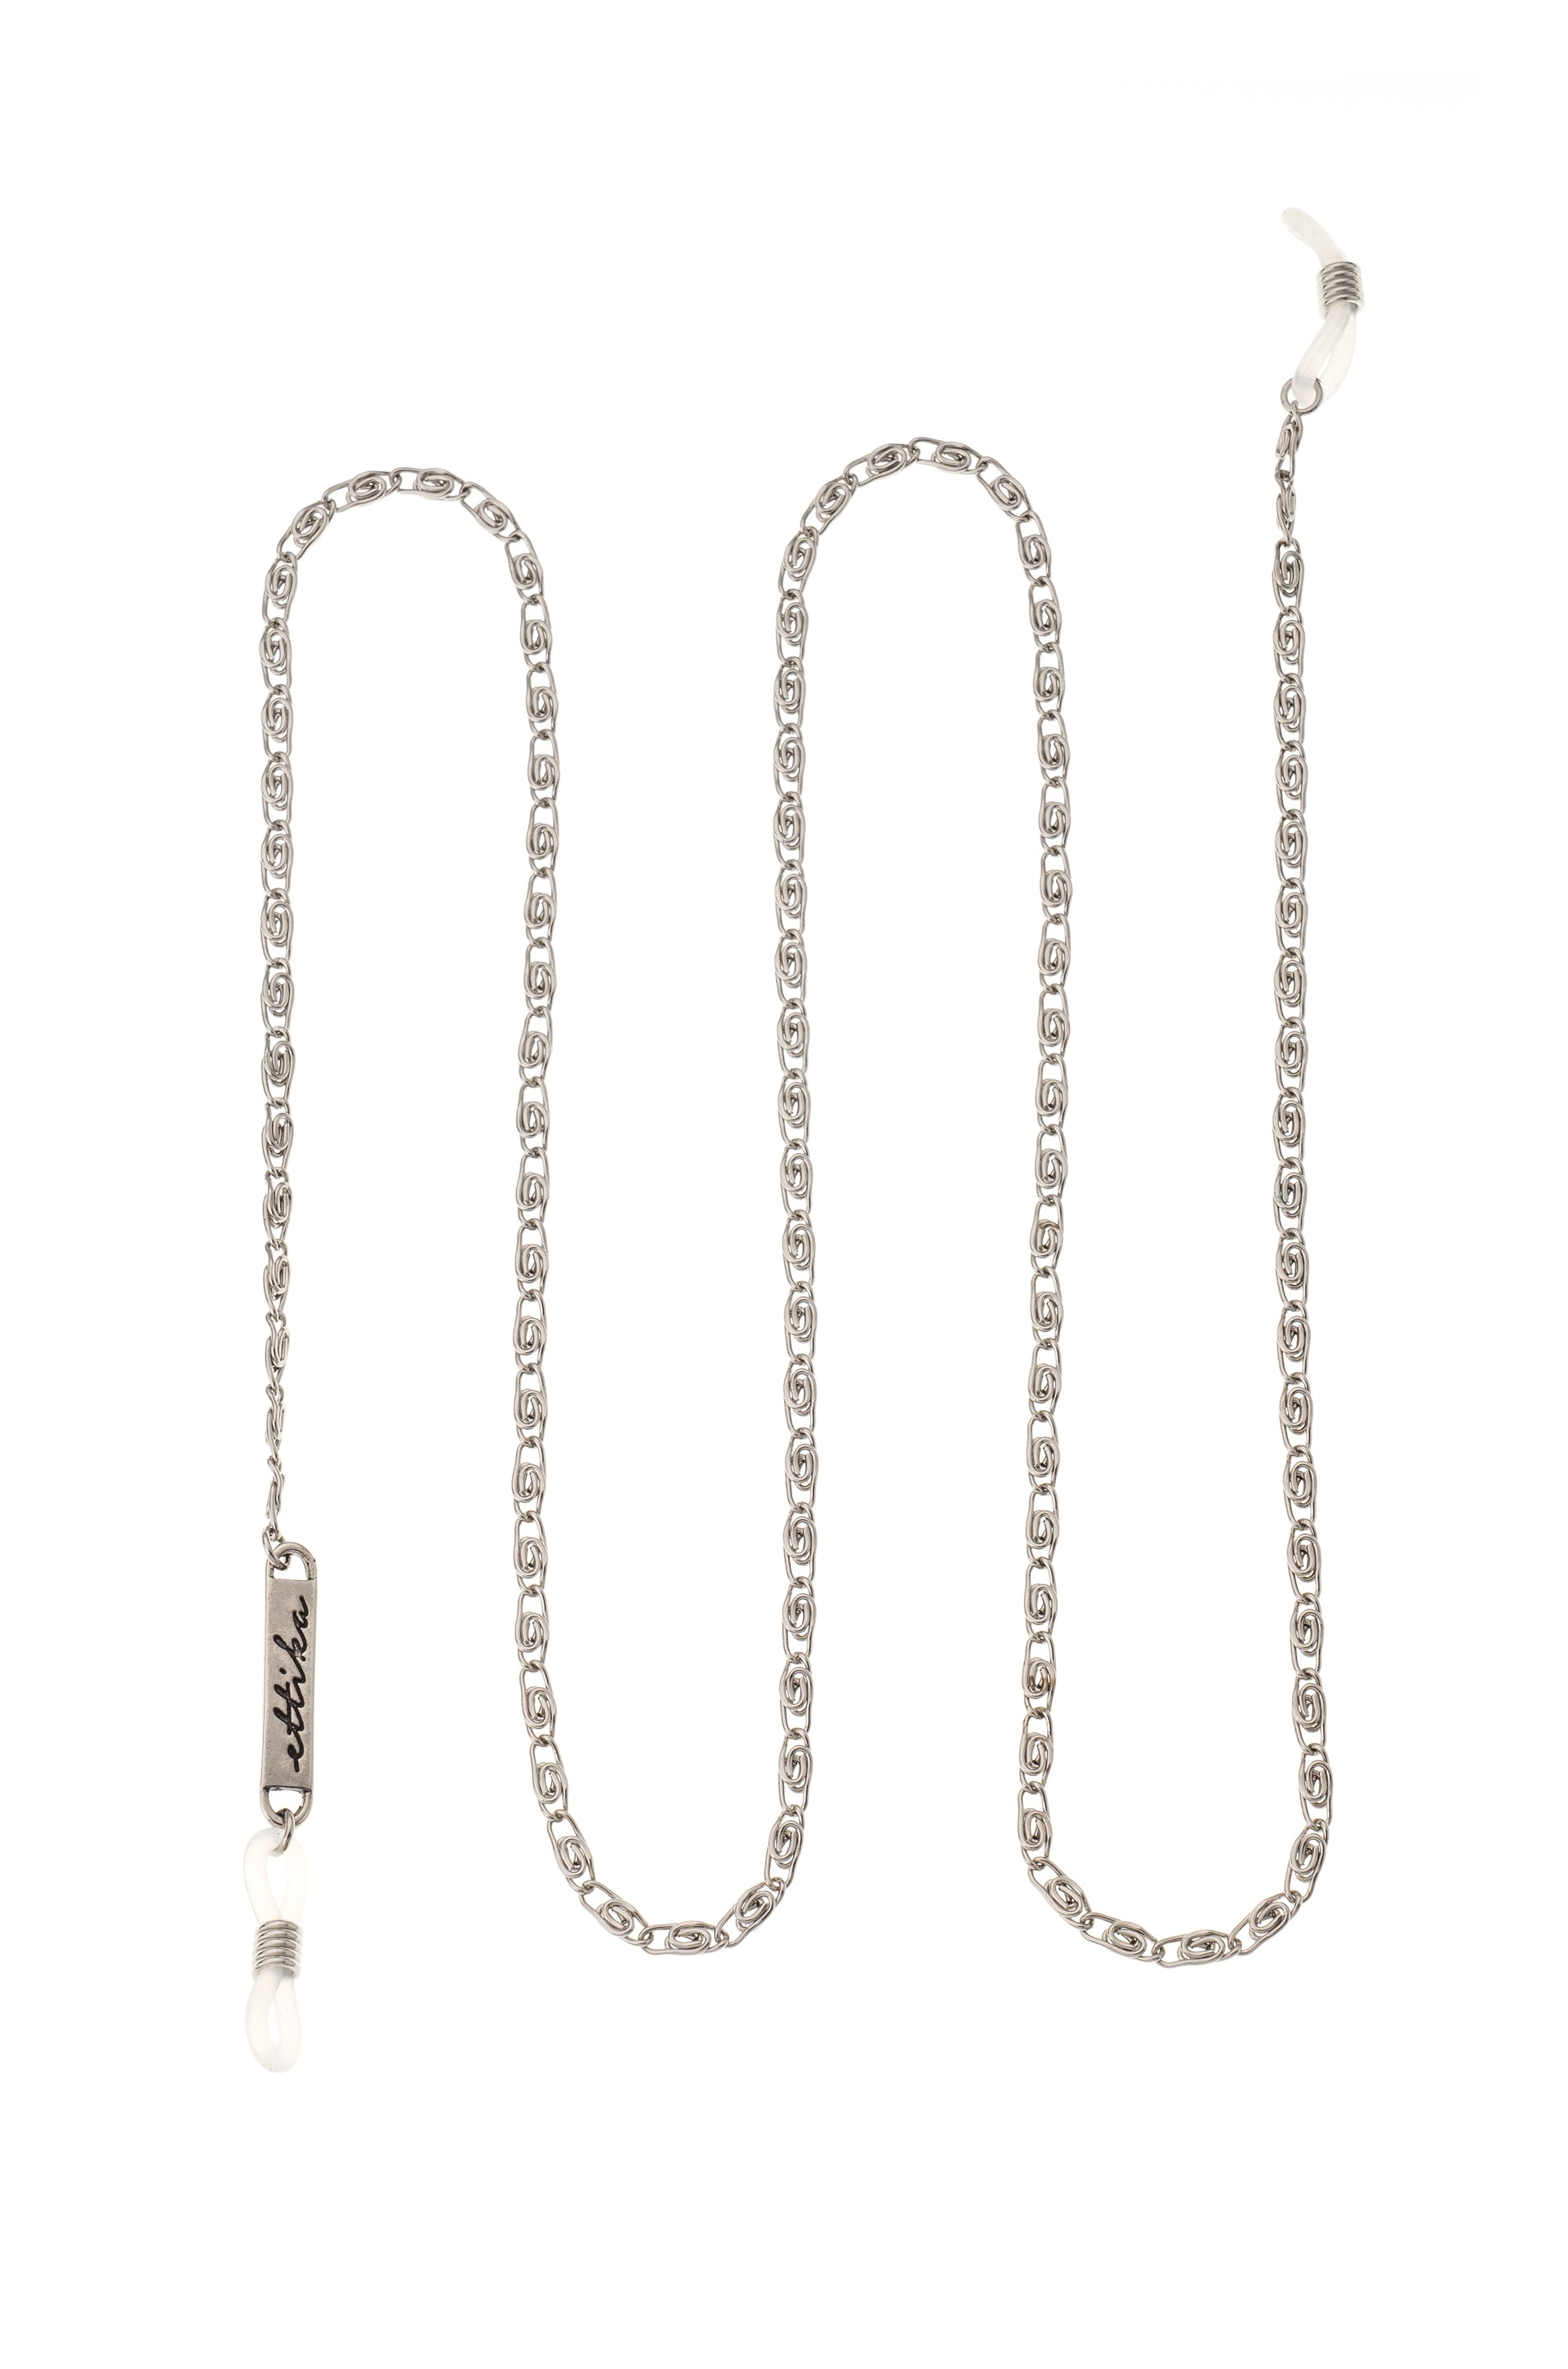 Level Up Glasses Chain in rhodium on white 2